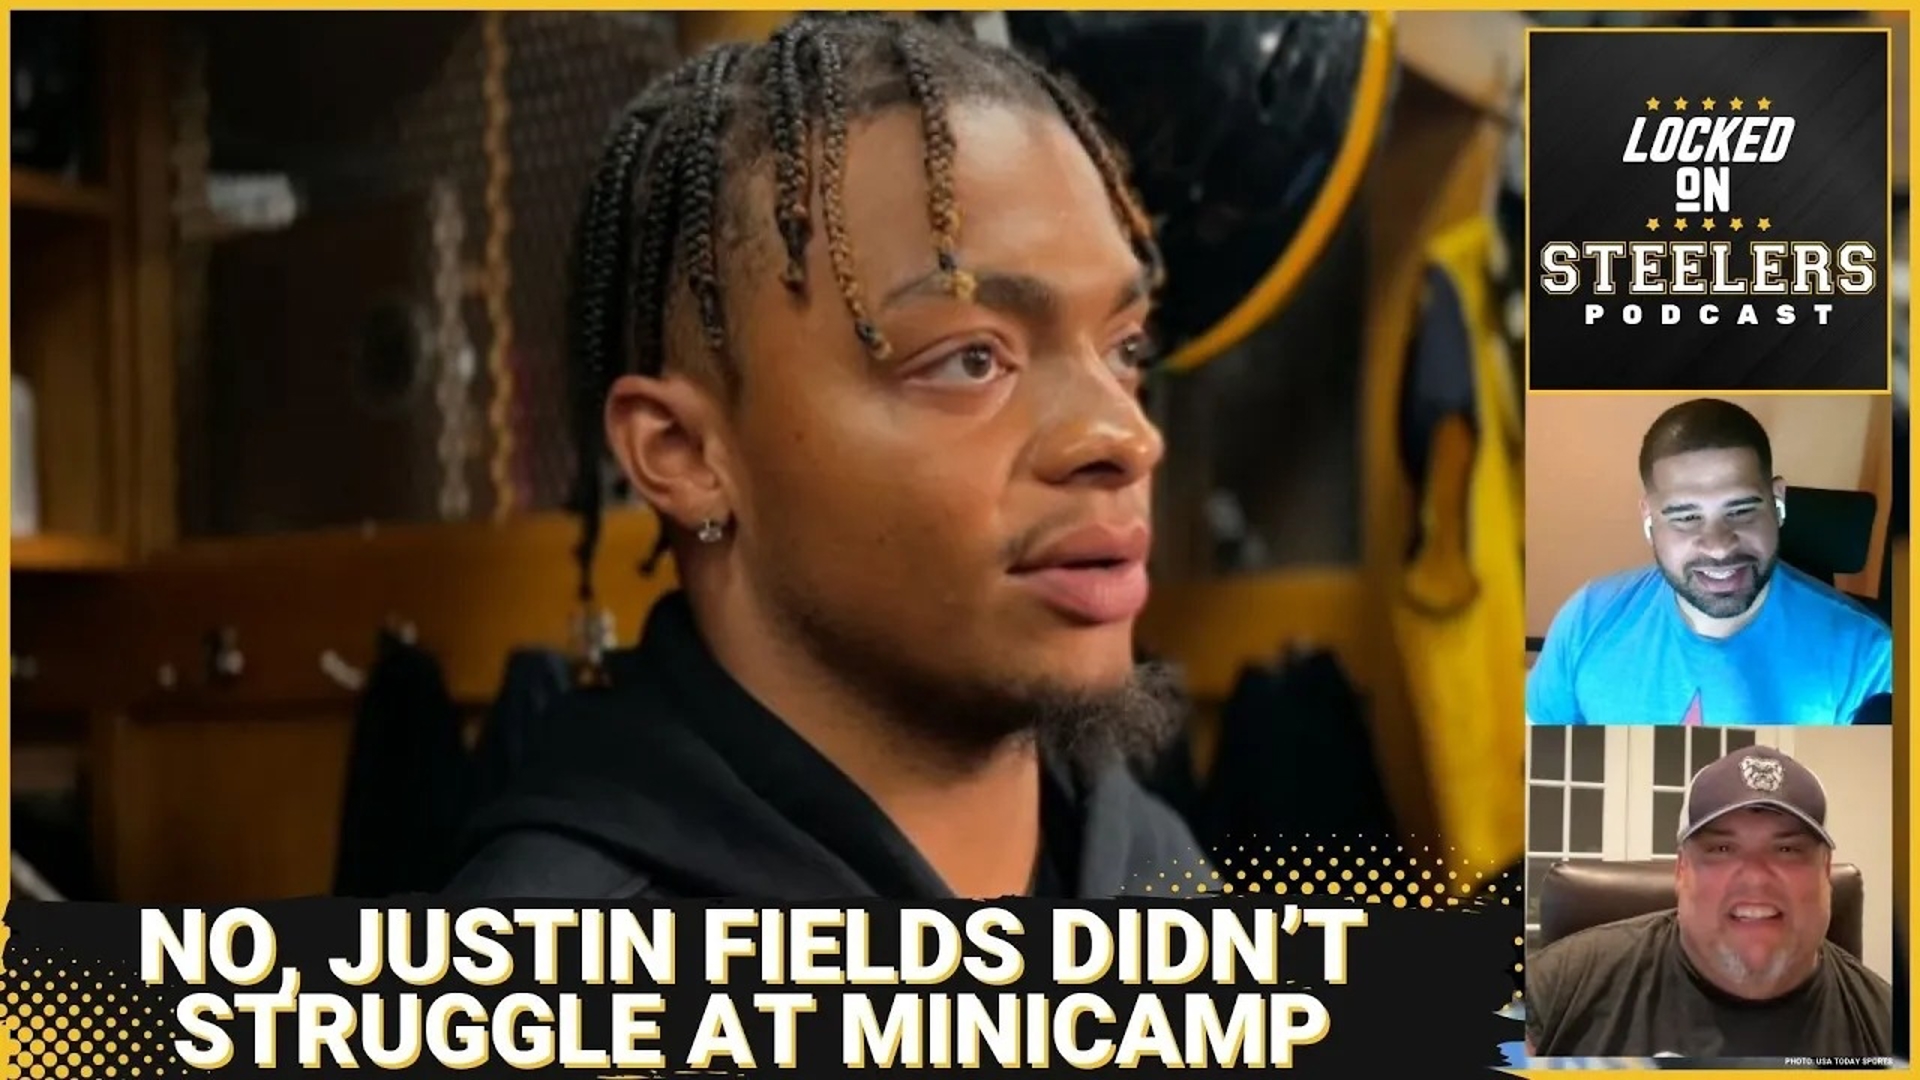 The Pittsburgh Steelers signed Justin Fields for his potential, but did he struggle at minicamp?